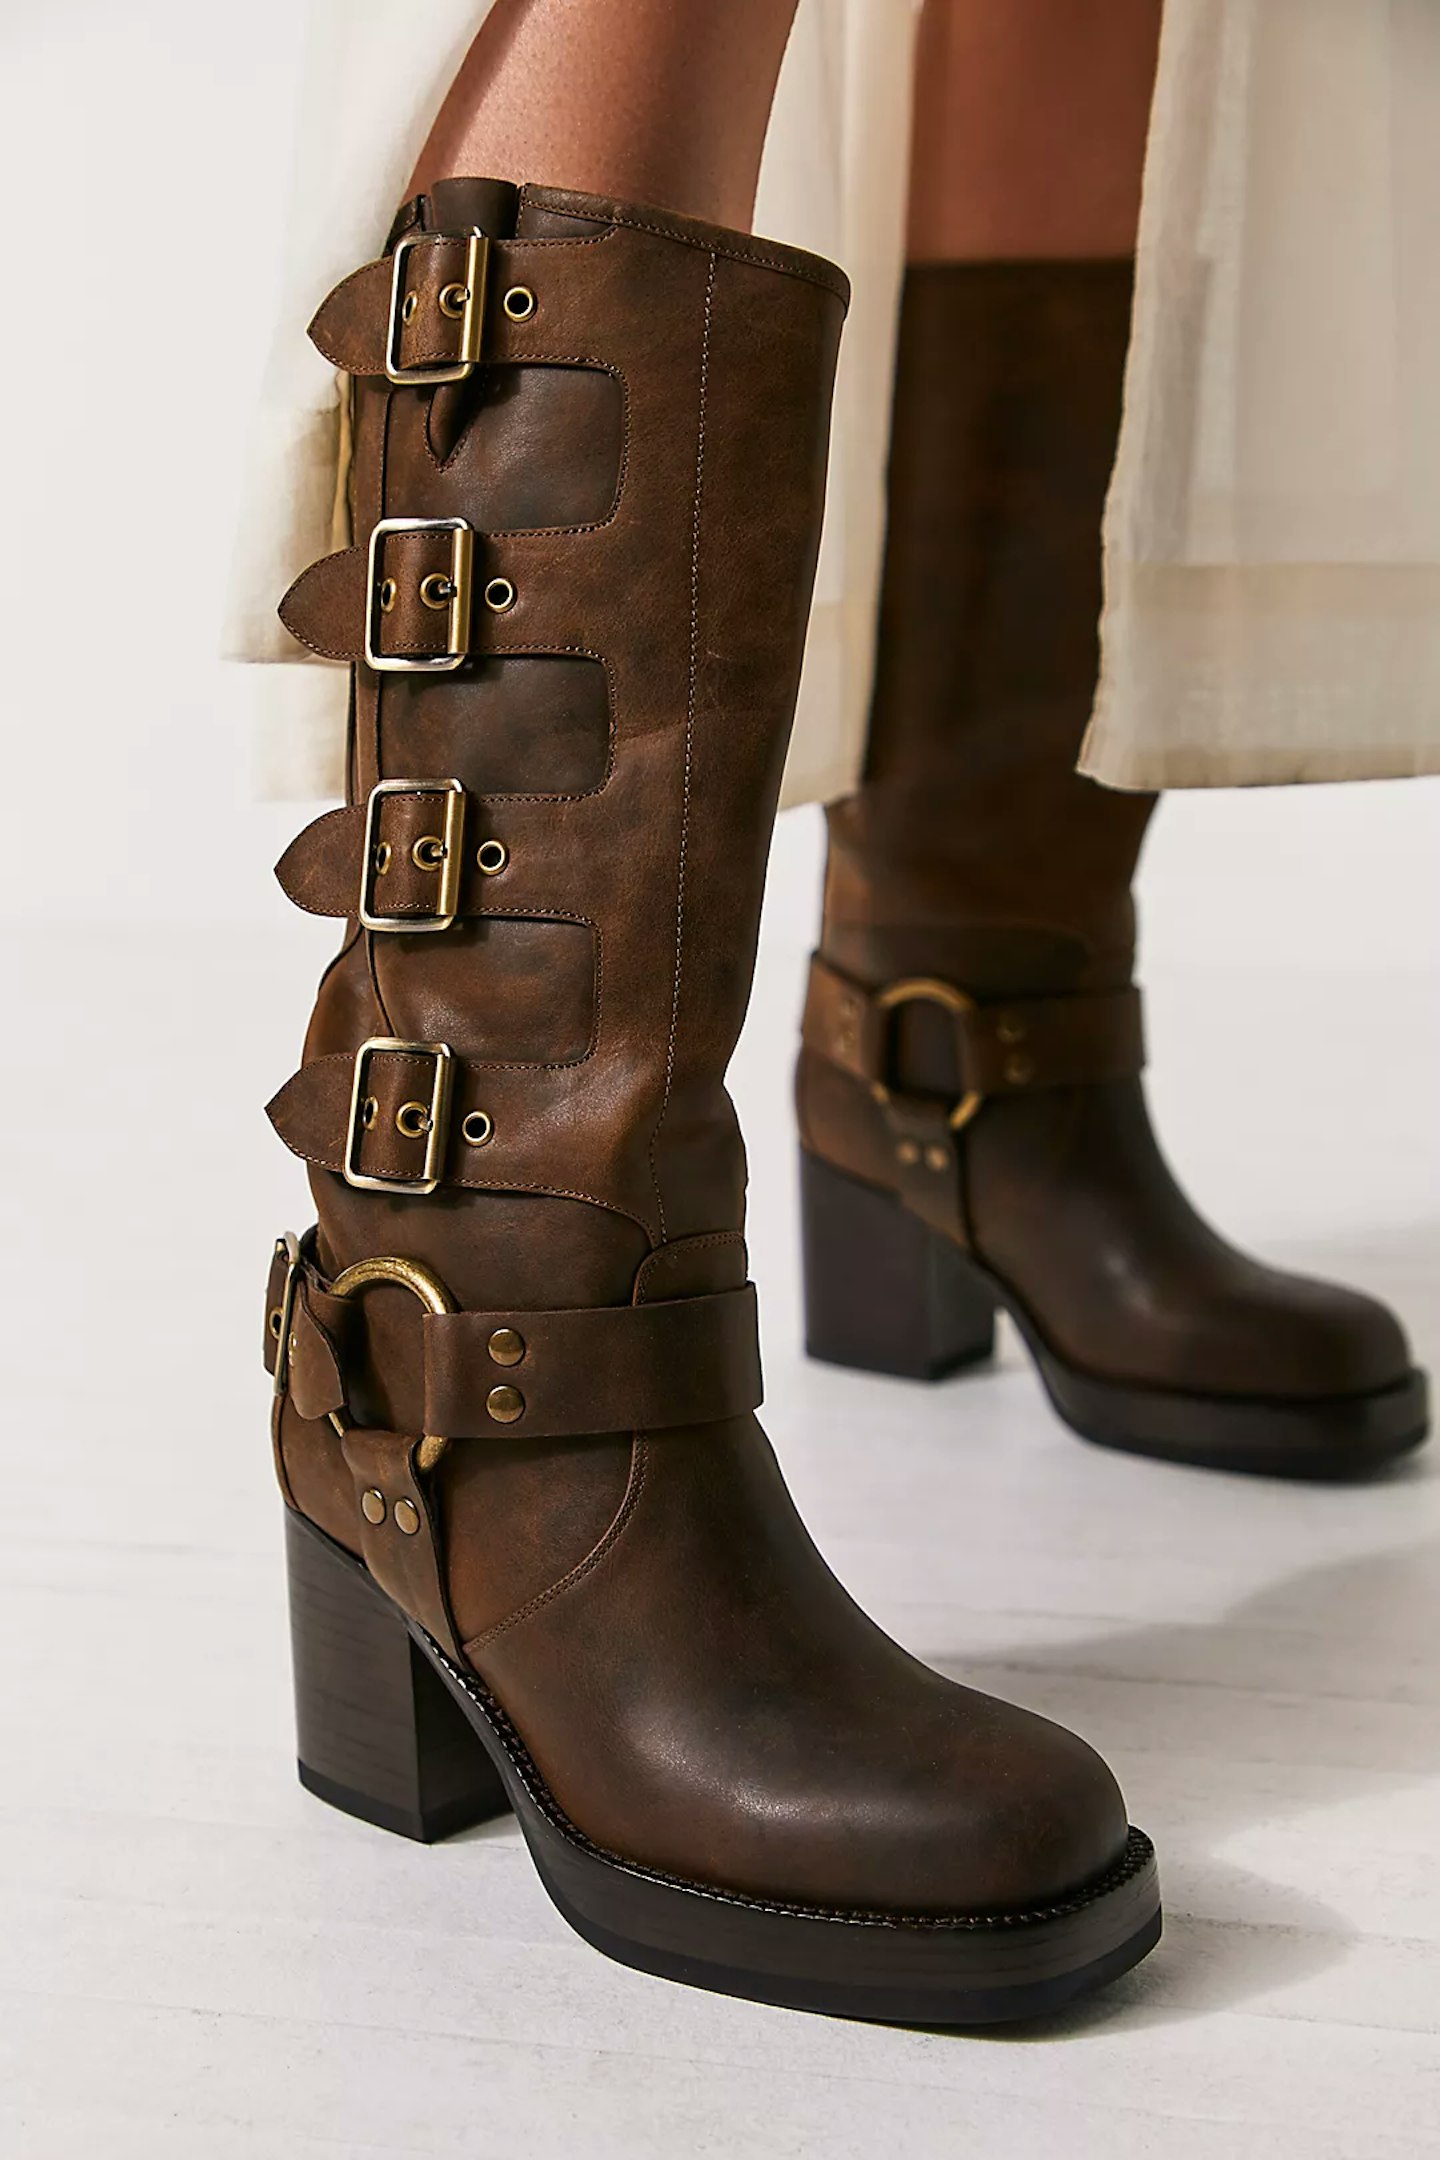 Free People Jeffrey Campbell Moto Boots 